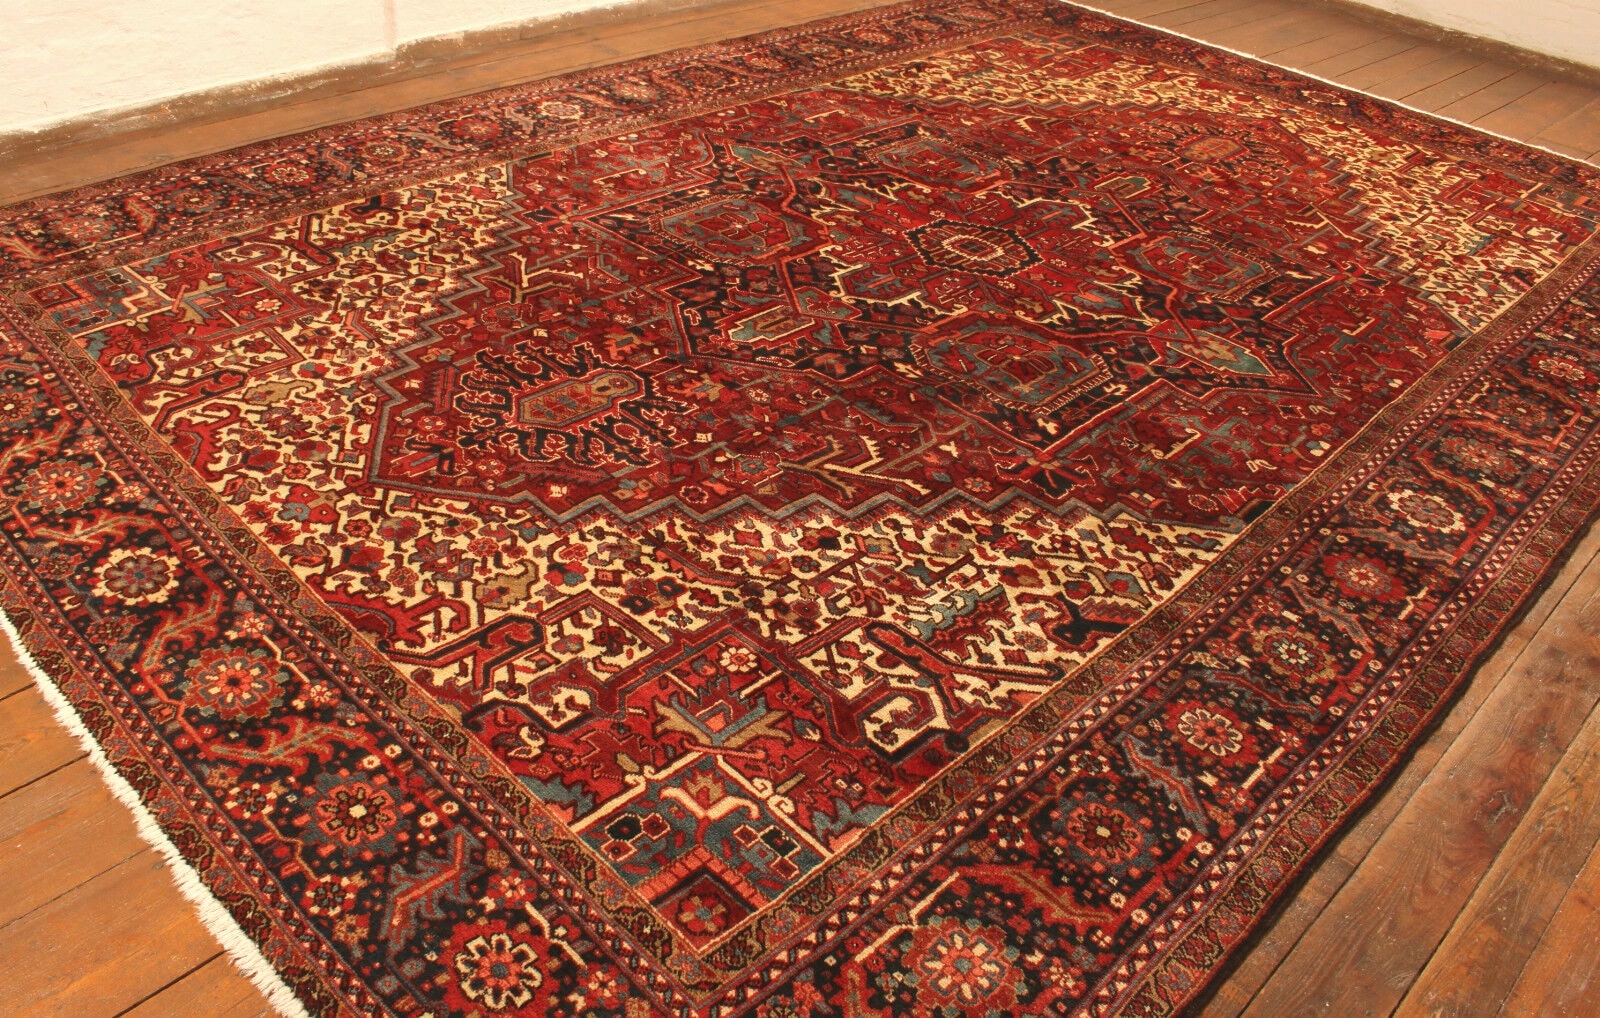 Detailed close-up of the rich history depicted in the Handmade Vintage Persian Style Heriz Rug